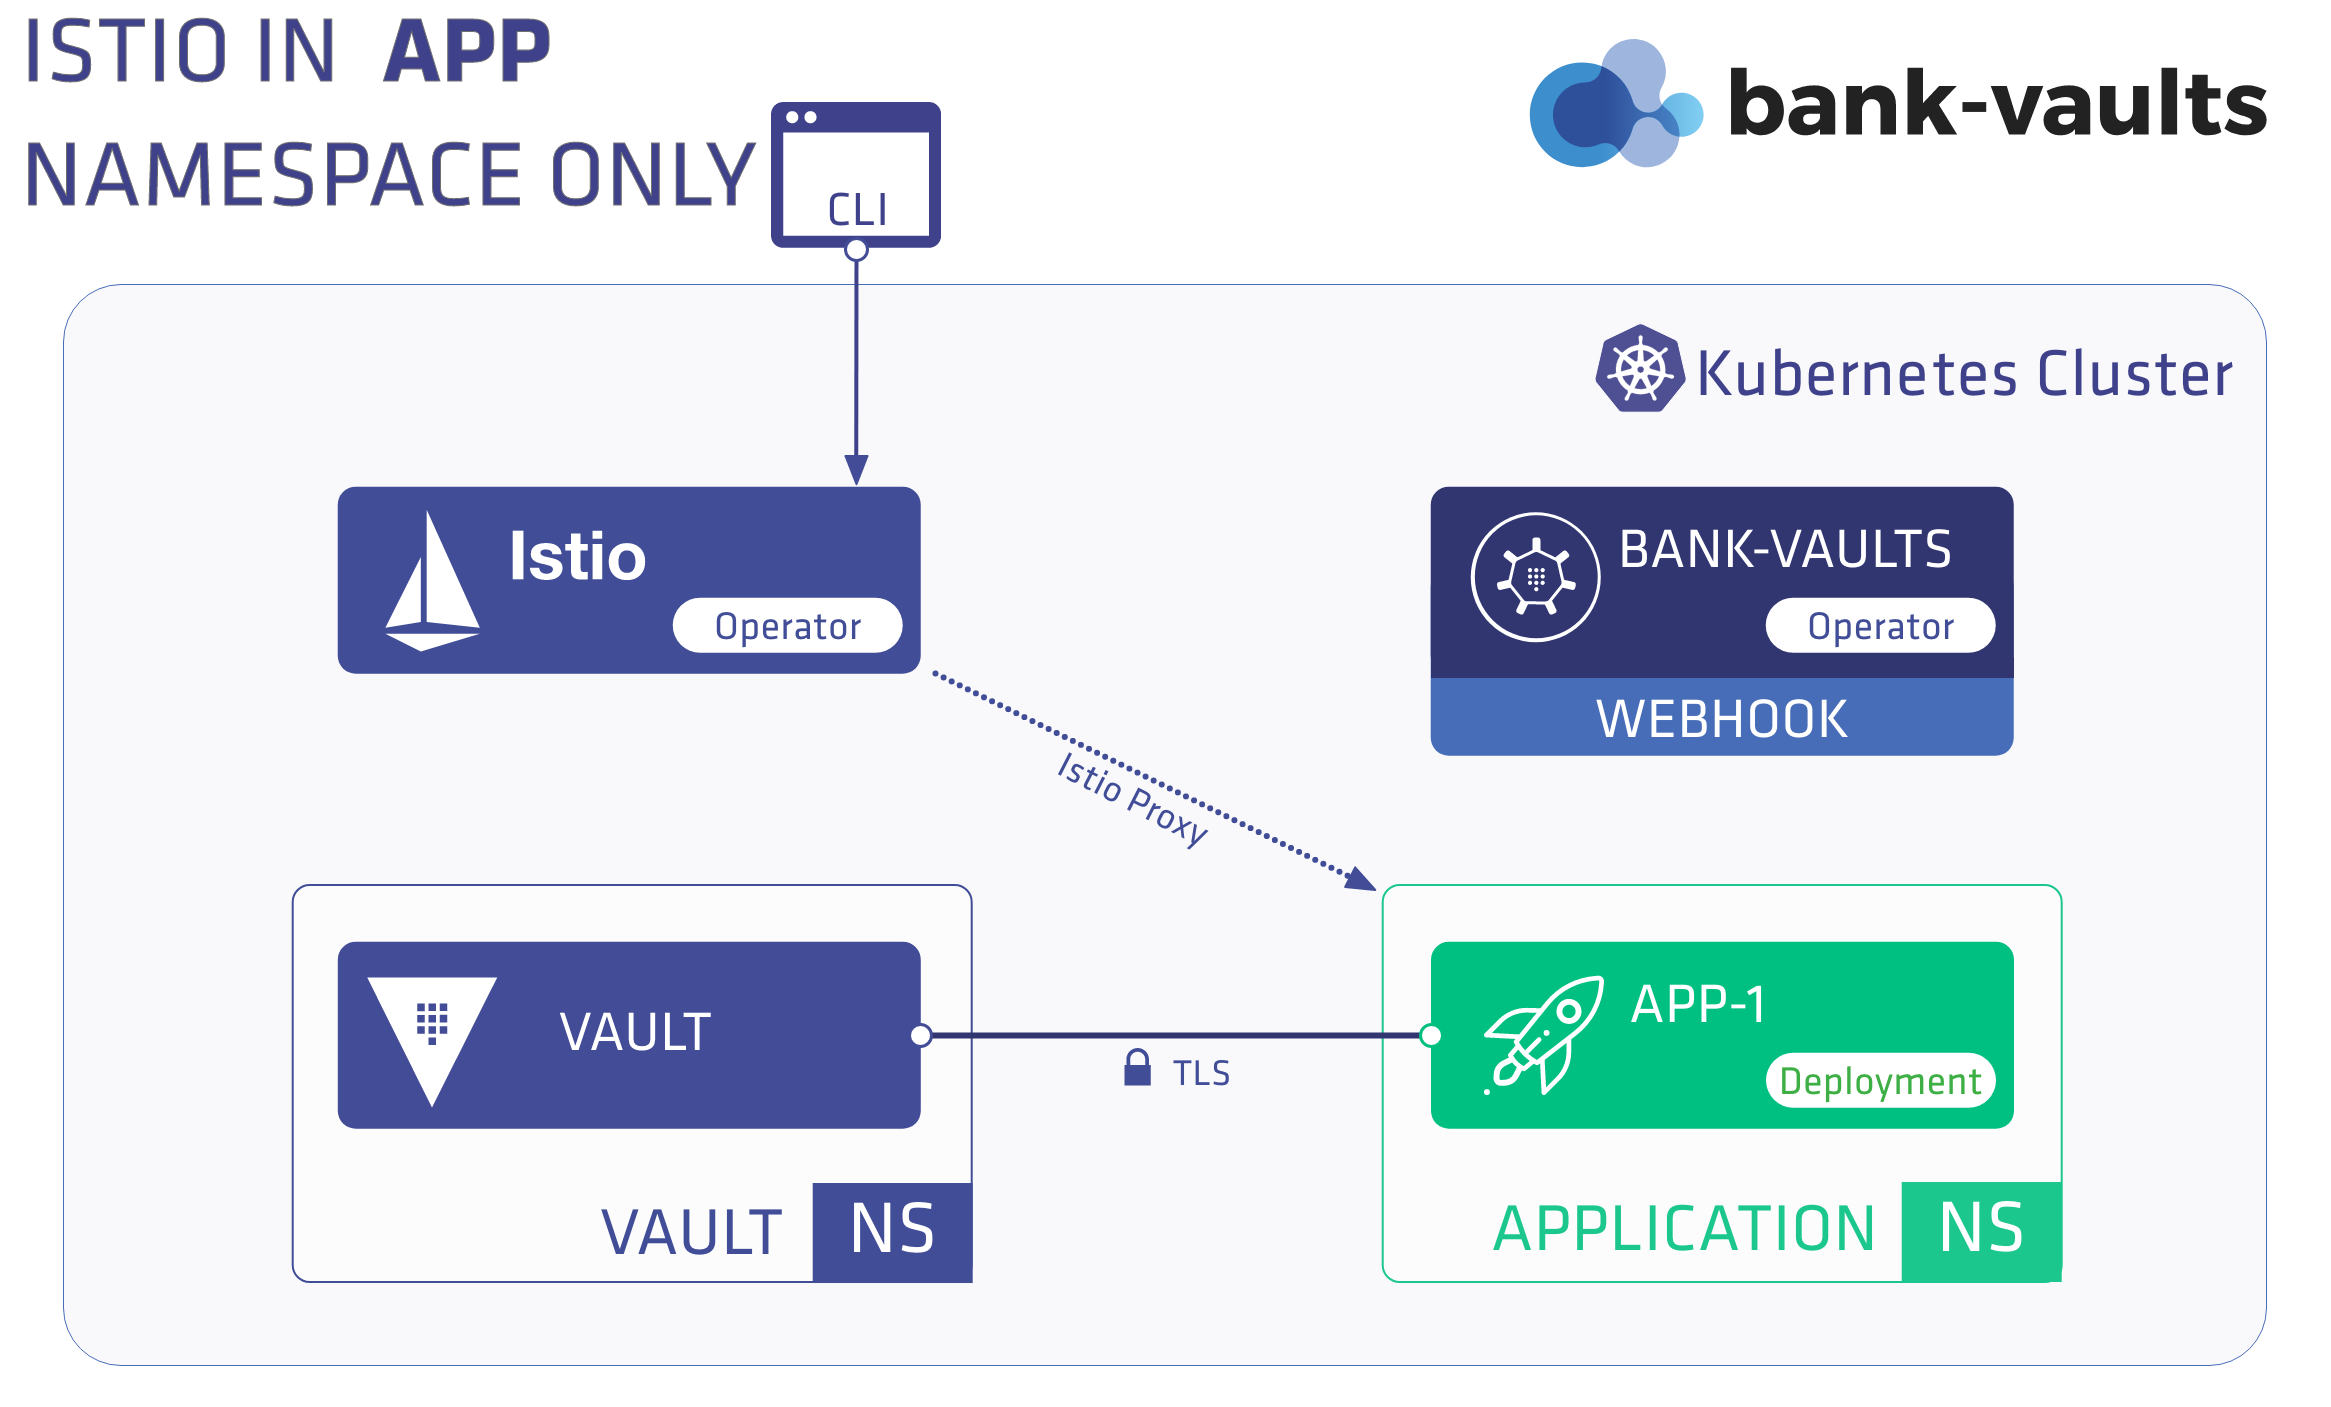 Running Vault outside the Istio mesh